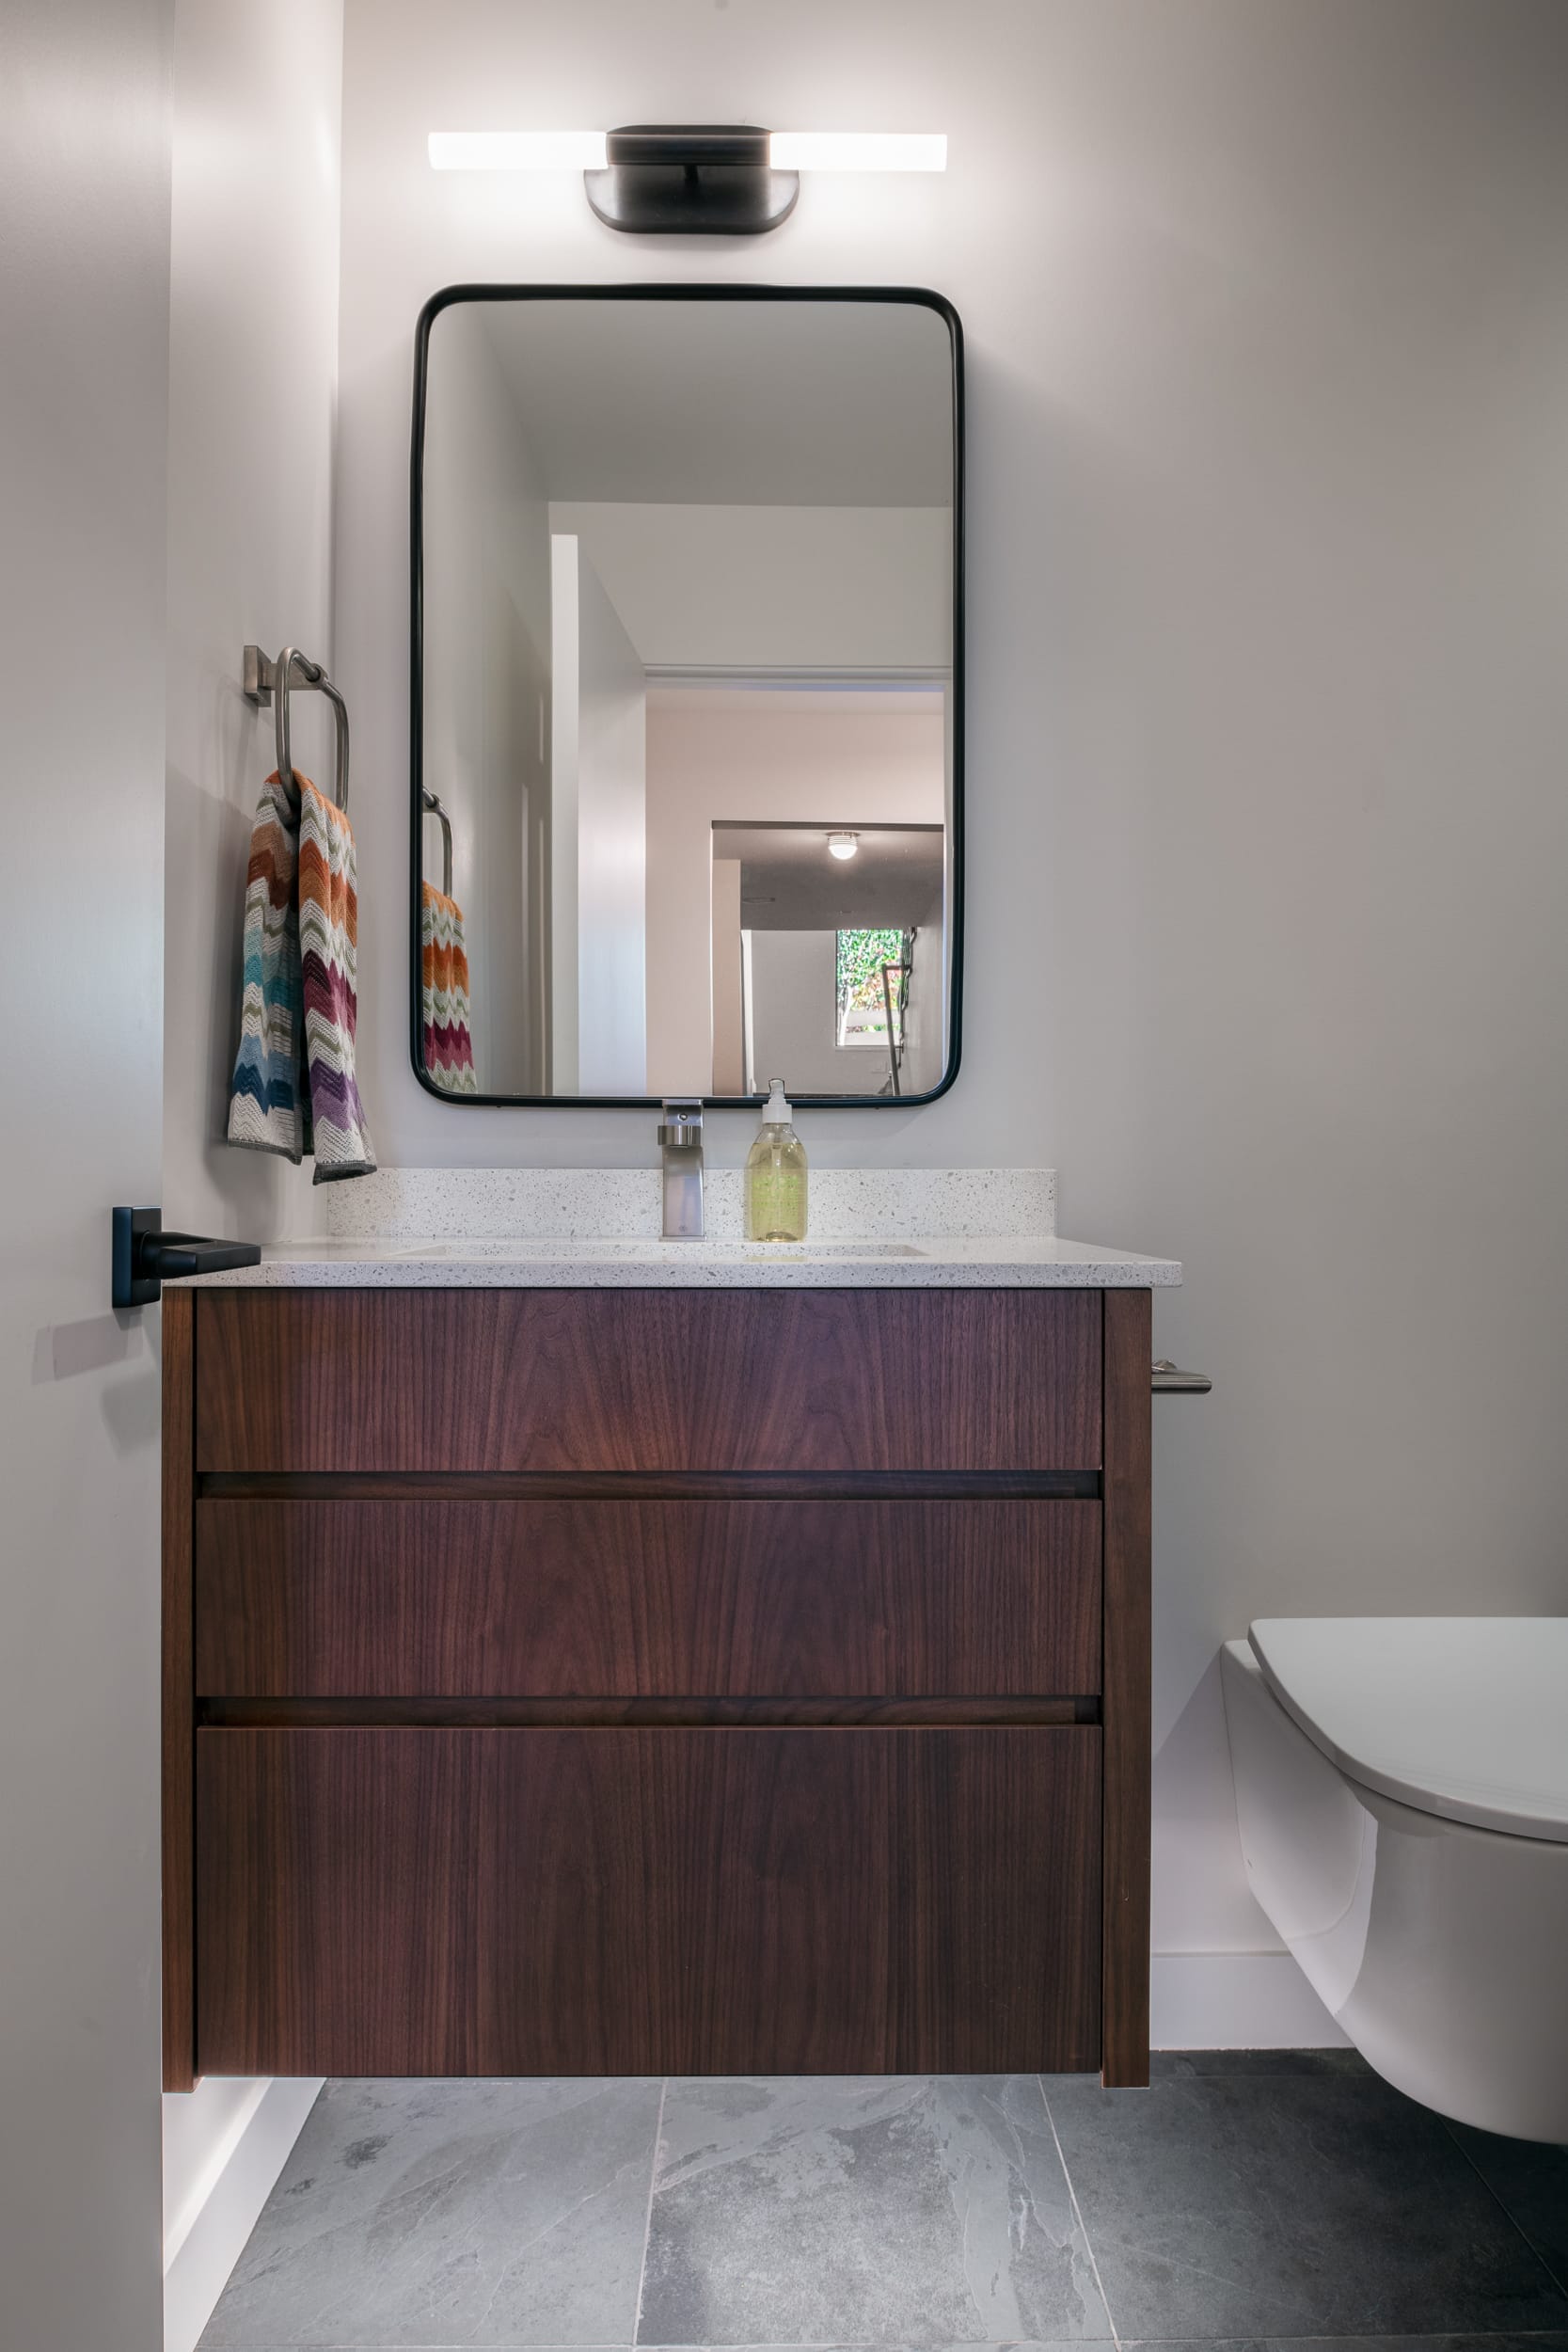 A modern bathroom with a wooden vanity and mirror.